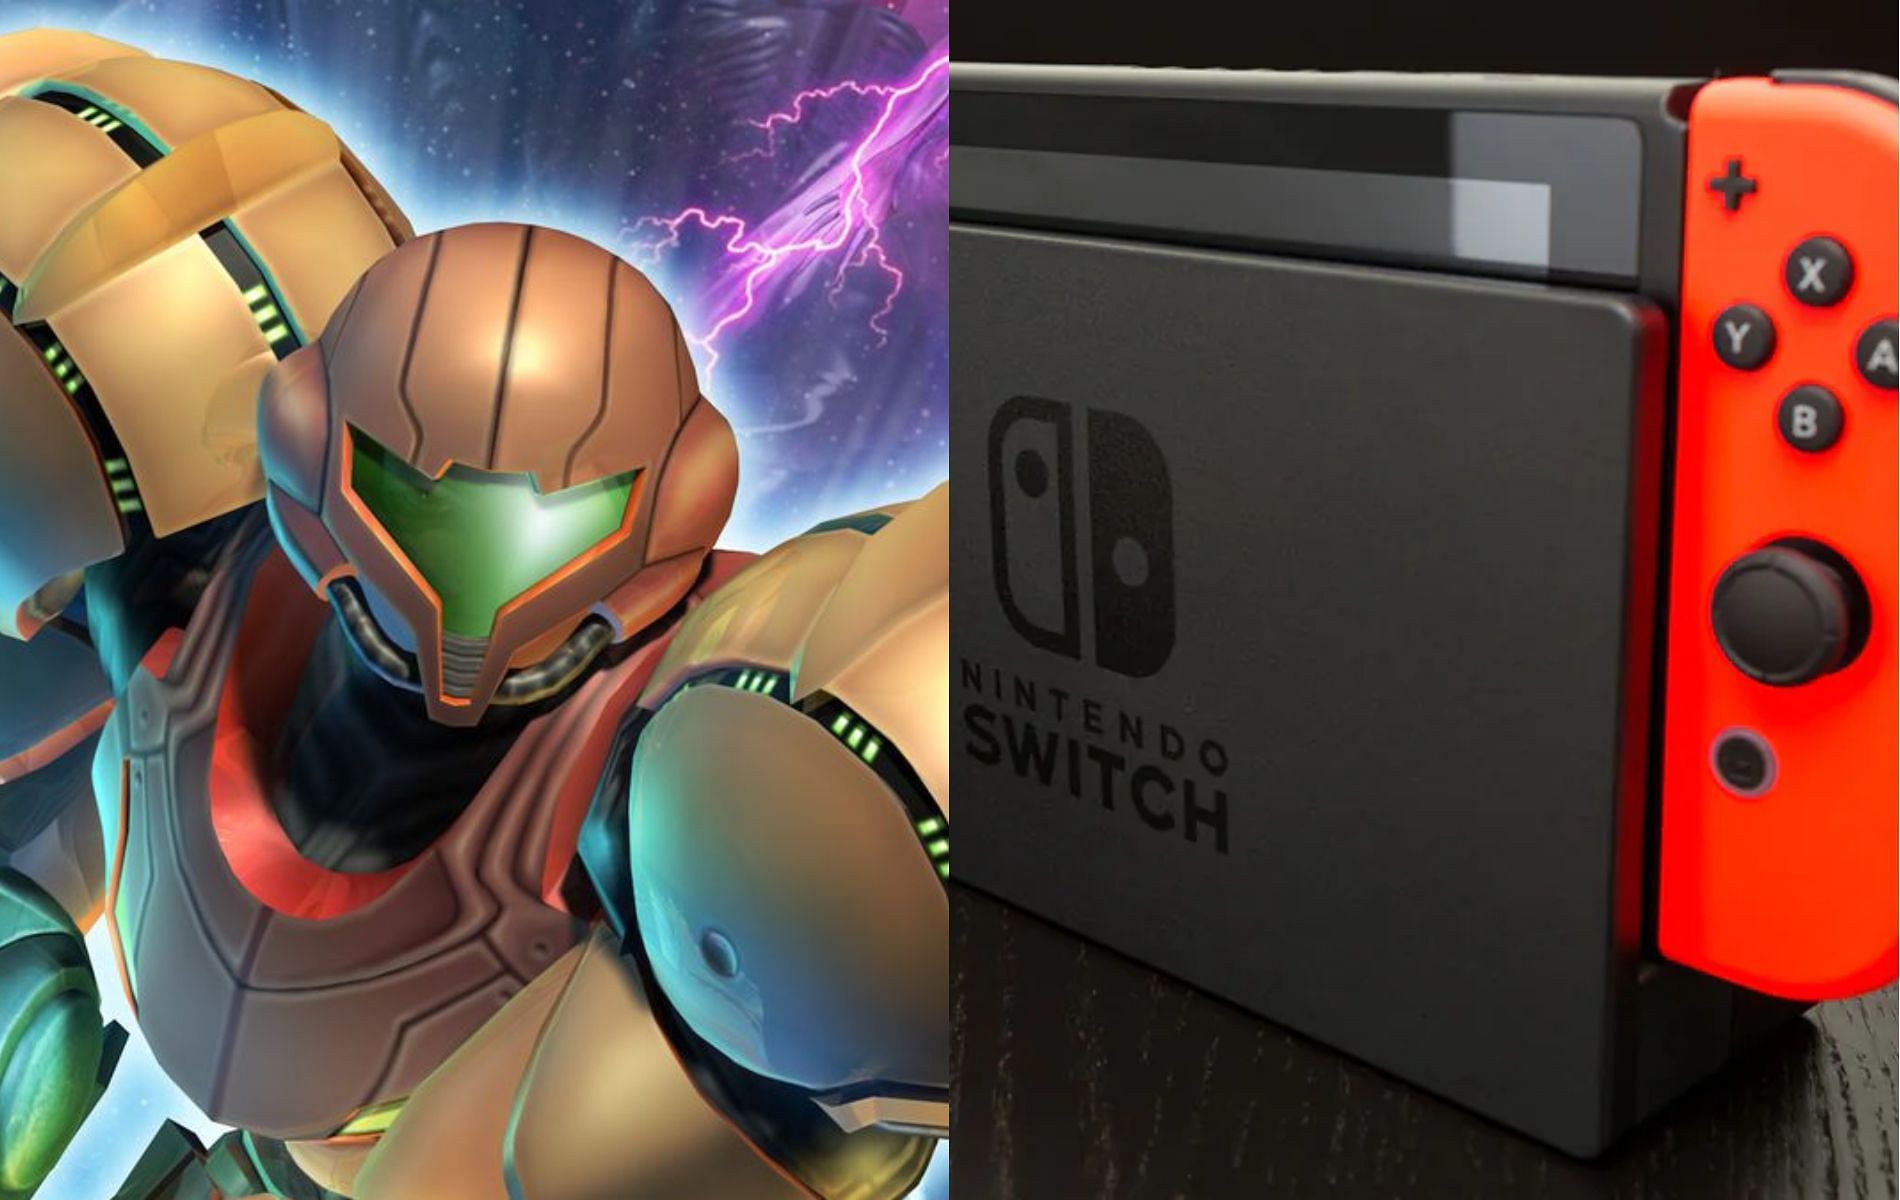 More rumors suggest the first game in the series is getting an upgrade (Images via Nintendo)